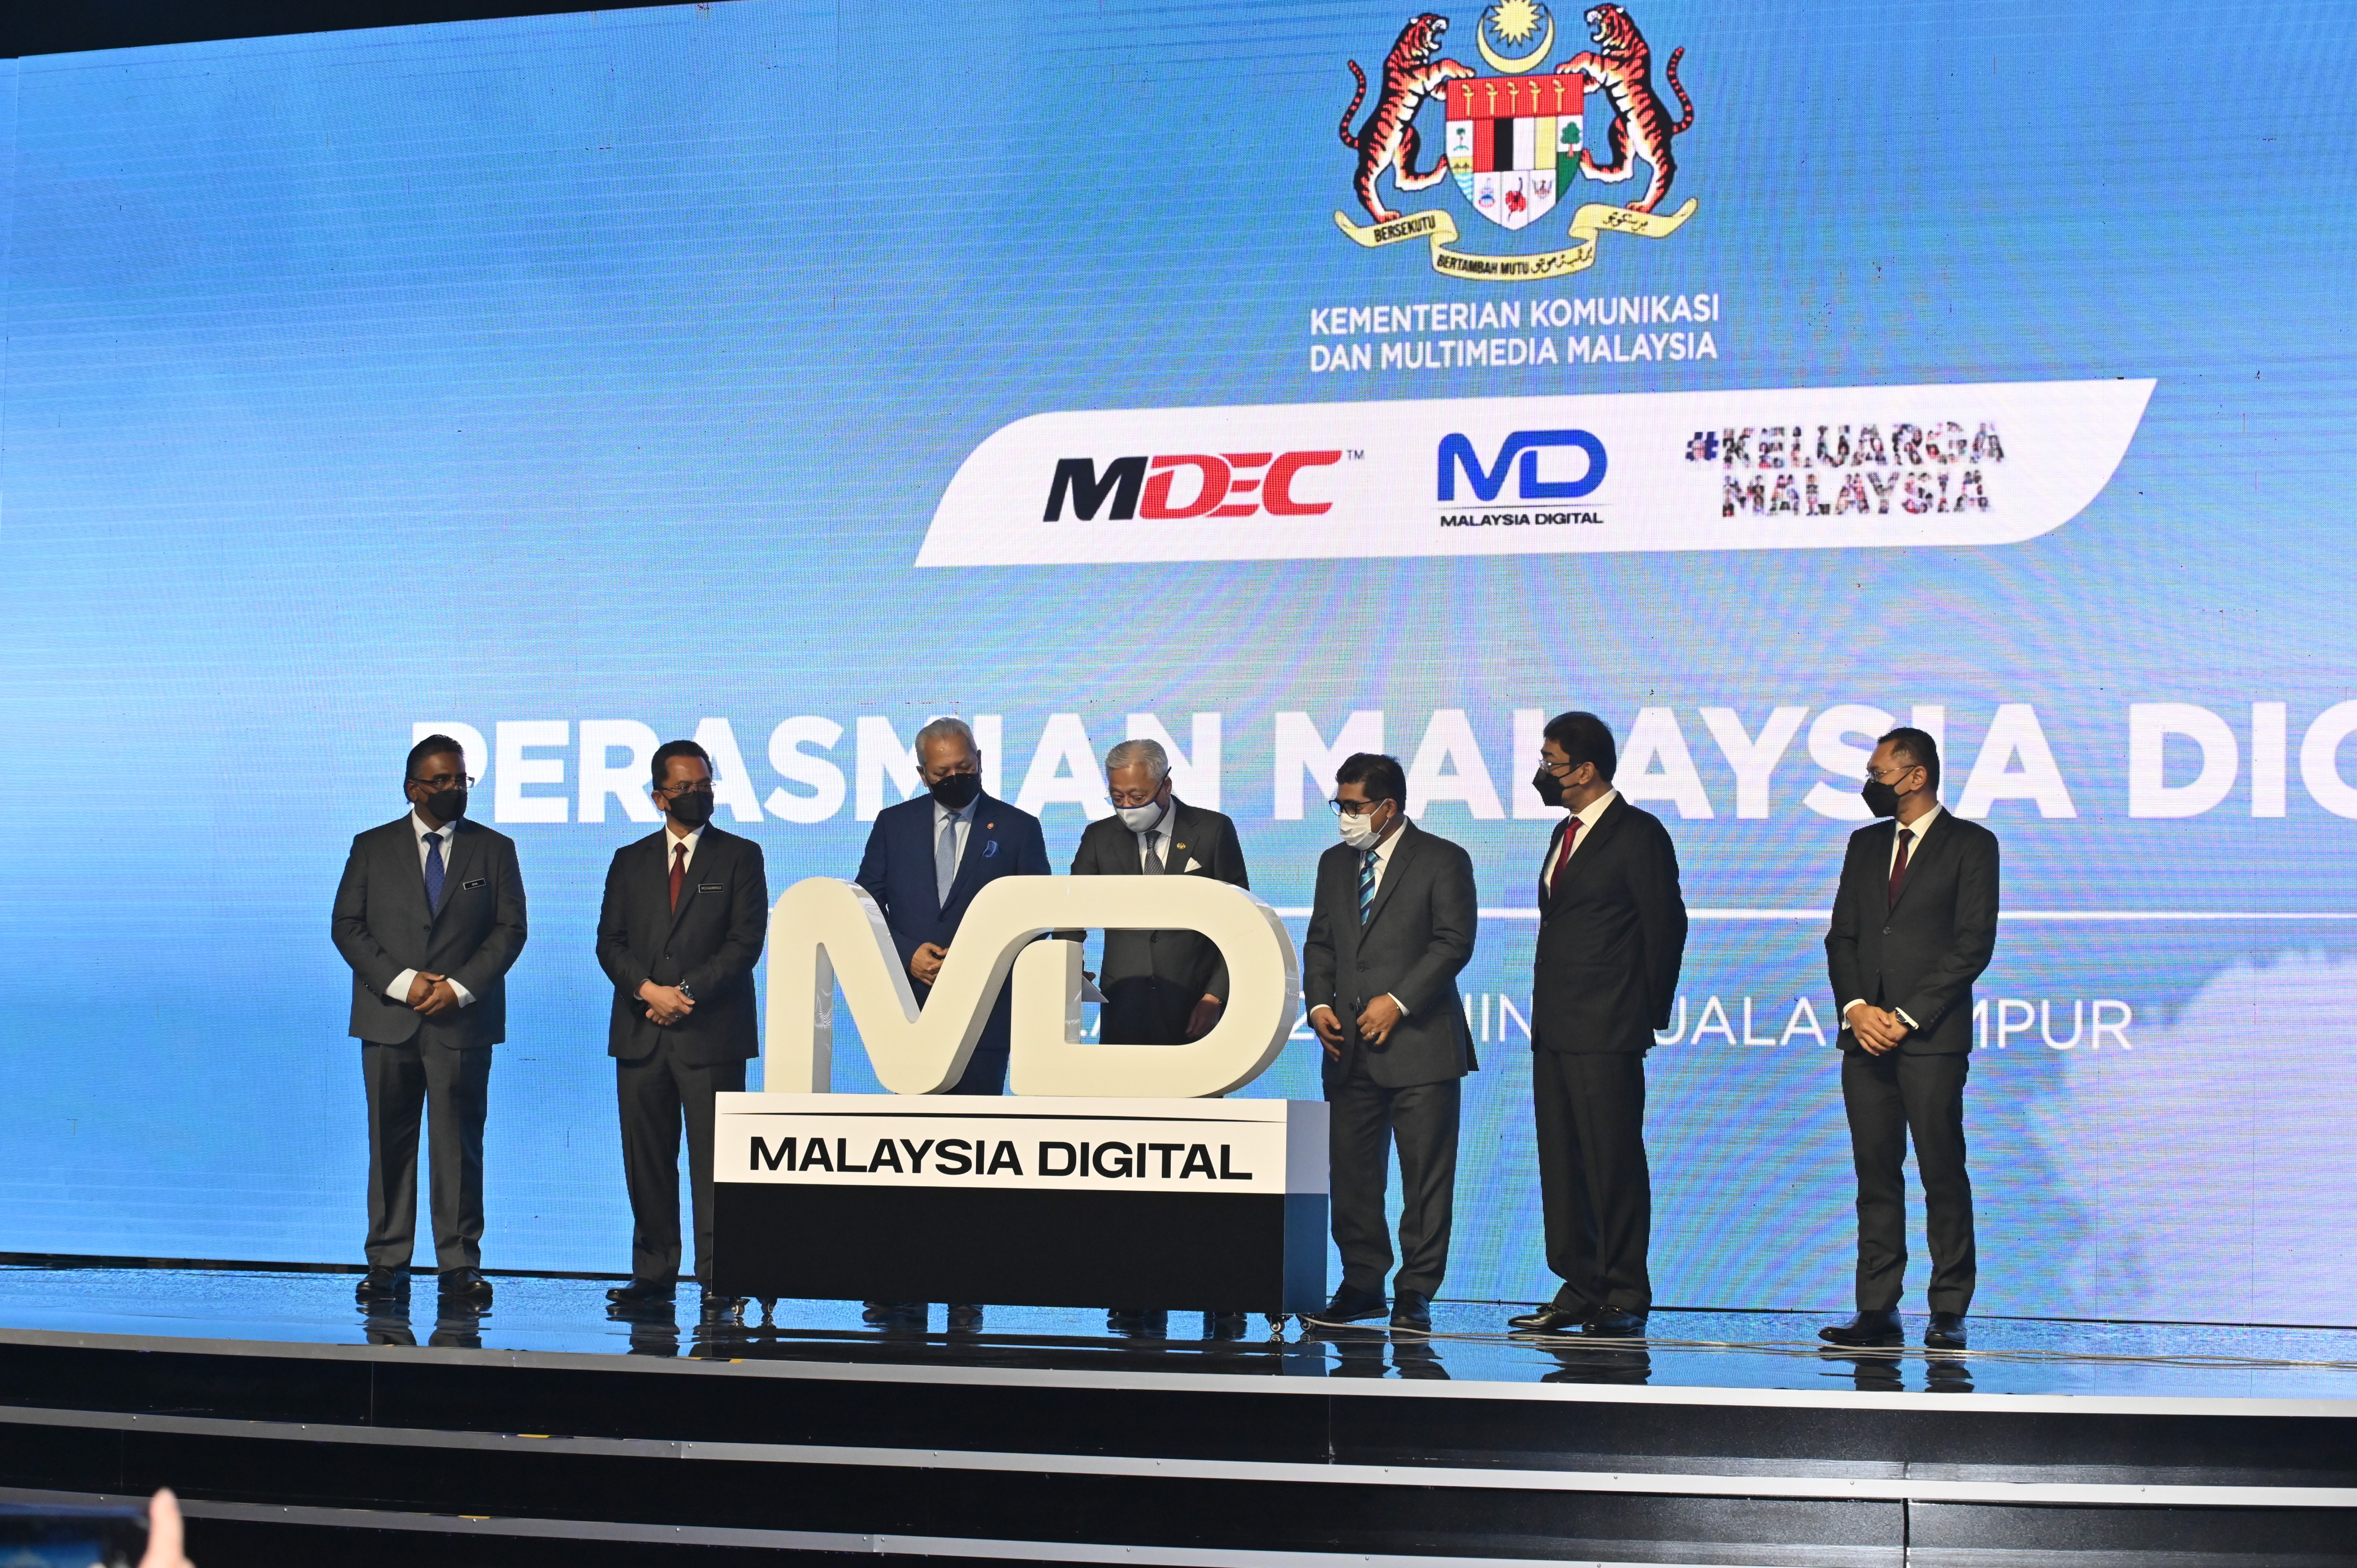 Prime minister Ismail Sabri (fourth from left) launches Malaysia Digital, with several government officials witnessing